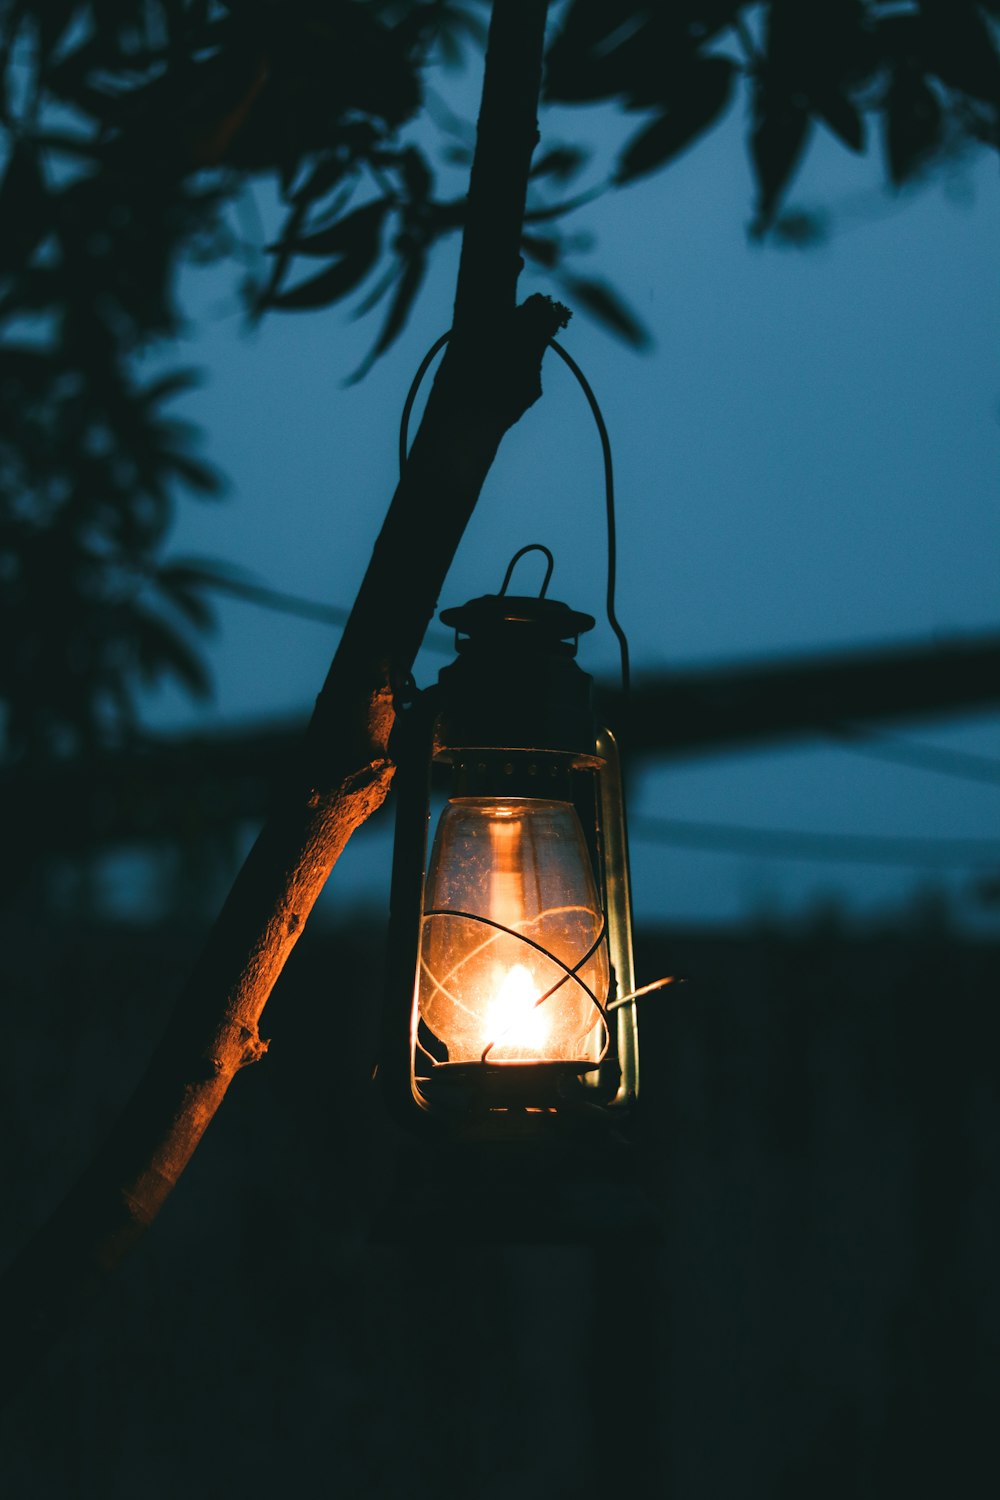 100+ Lantern Pictures | Download Free Images & Stock Photos on Unsplash